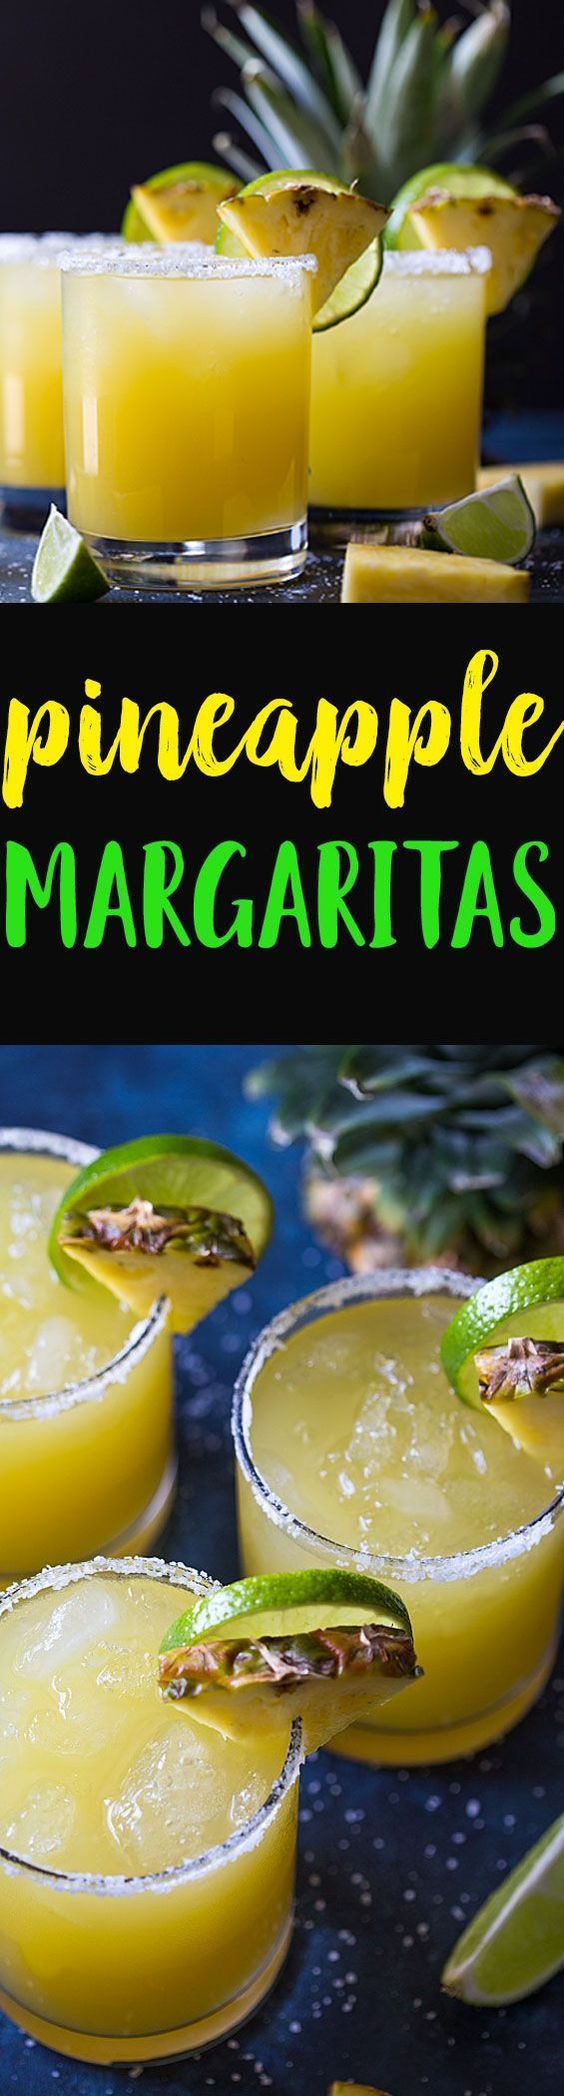 Pineapple Margarita – A sweet, tart and delicious margarita that is incredibly EASY to make!